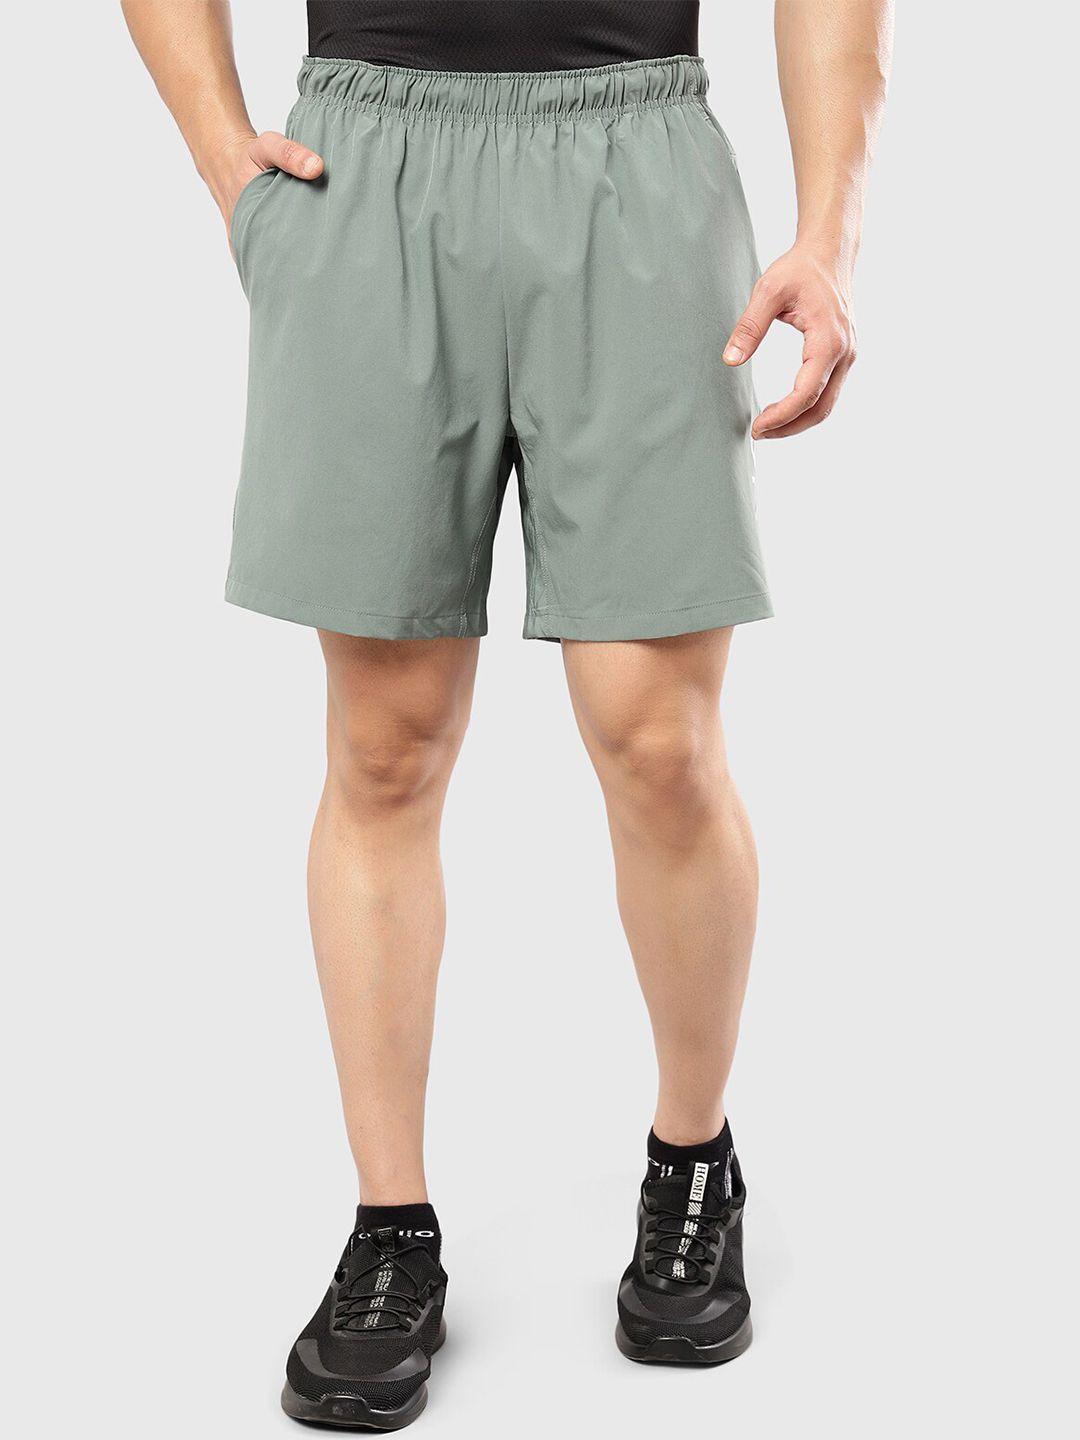 fuaark mid rise above knee length sports shorts